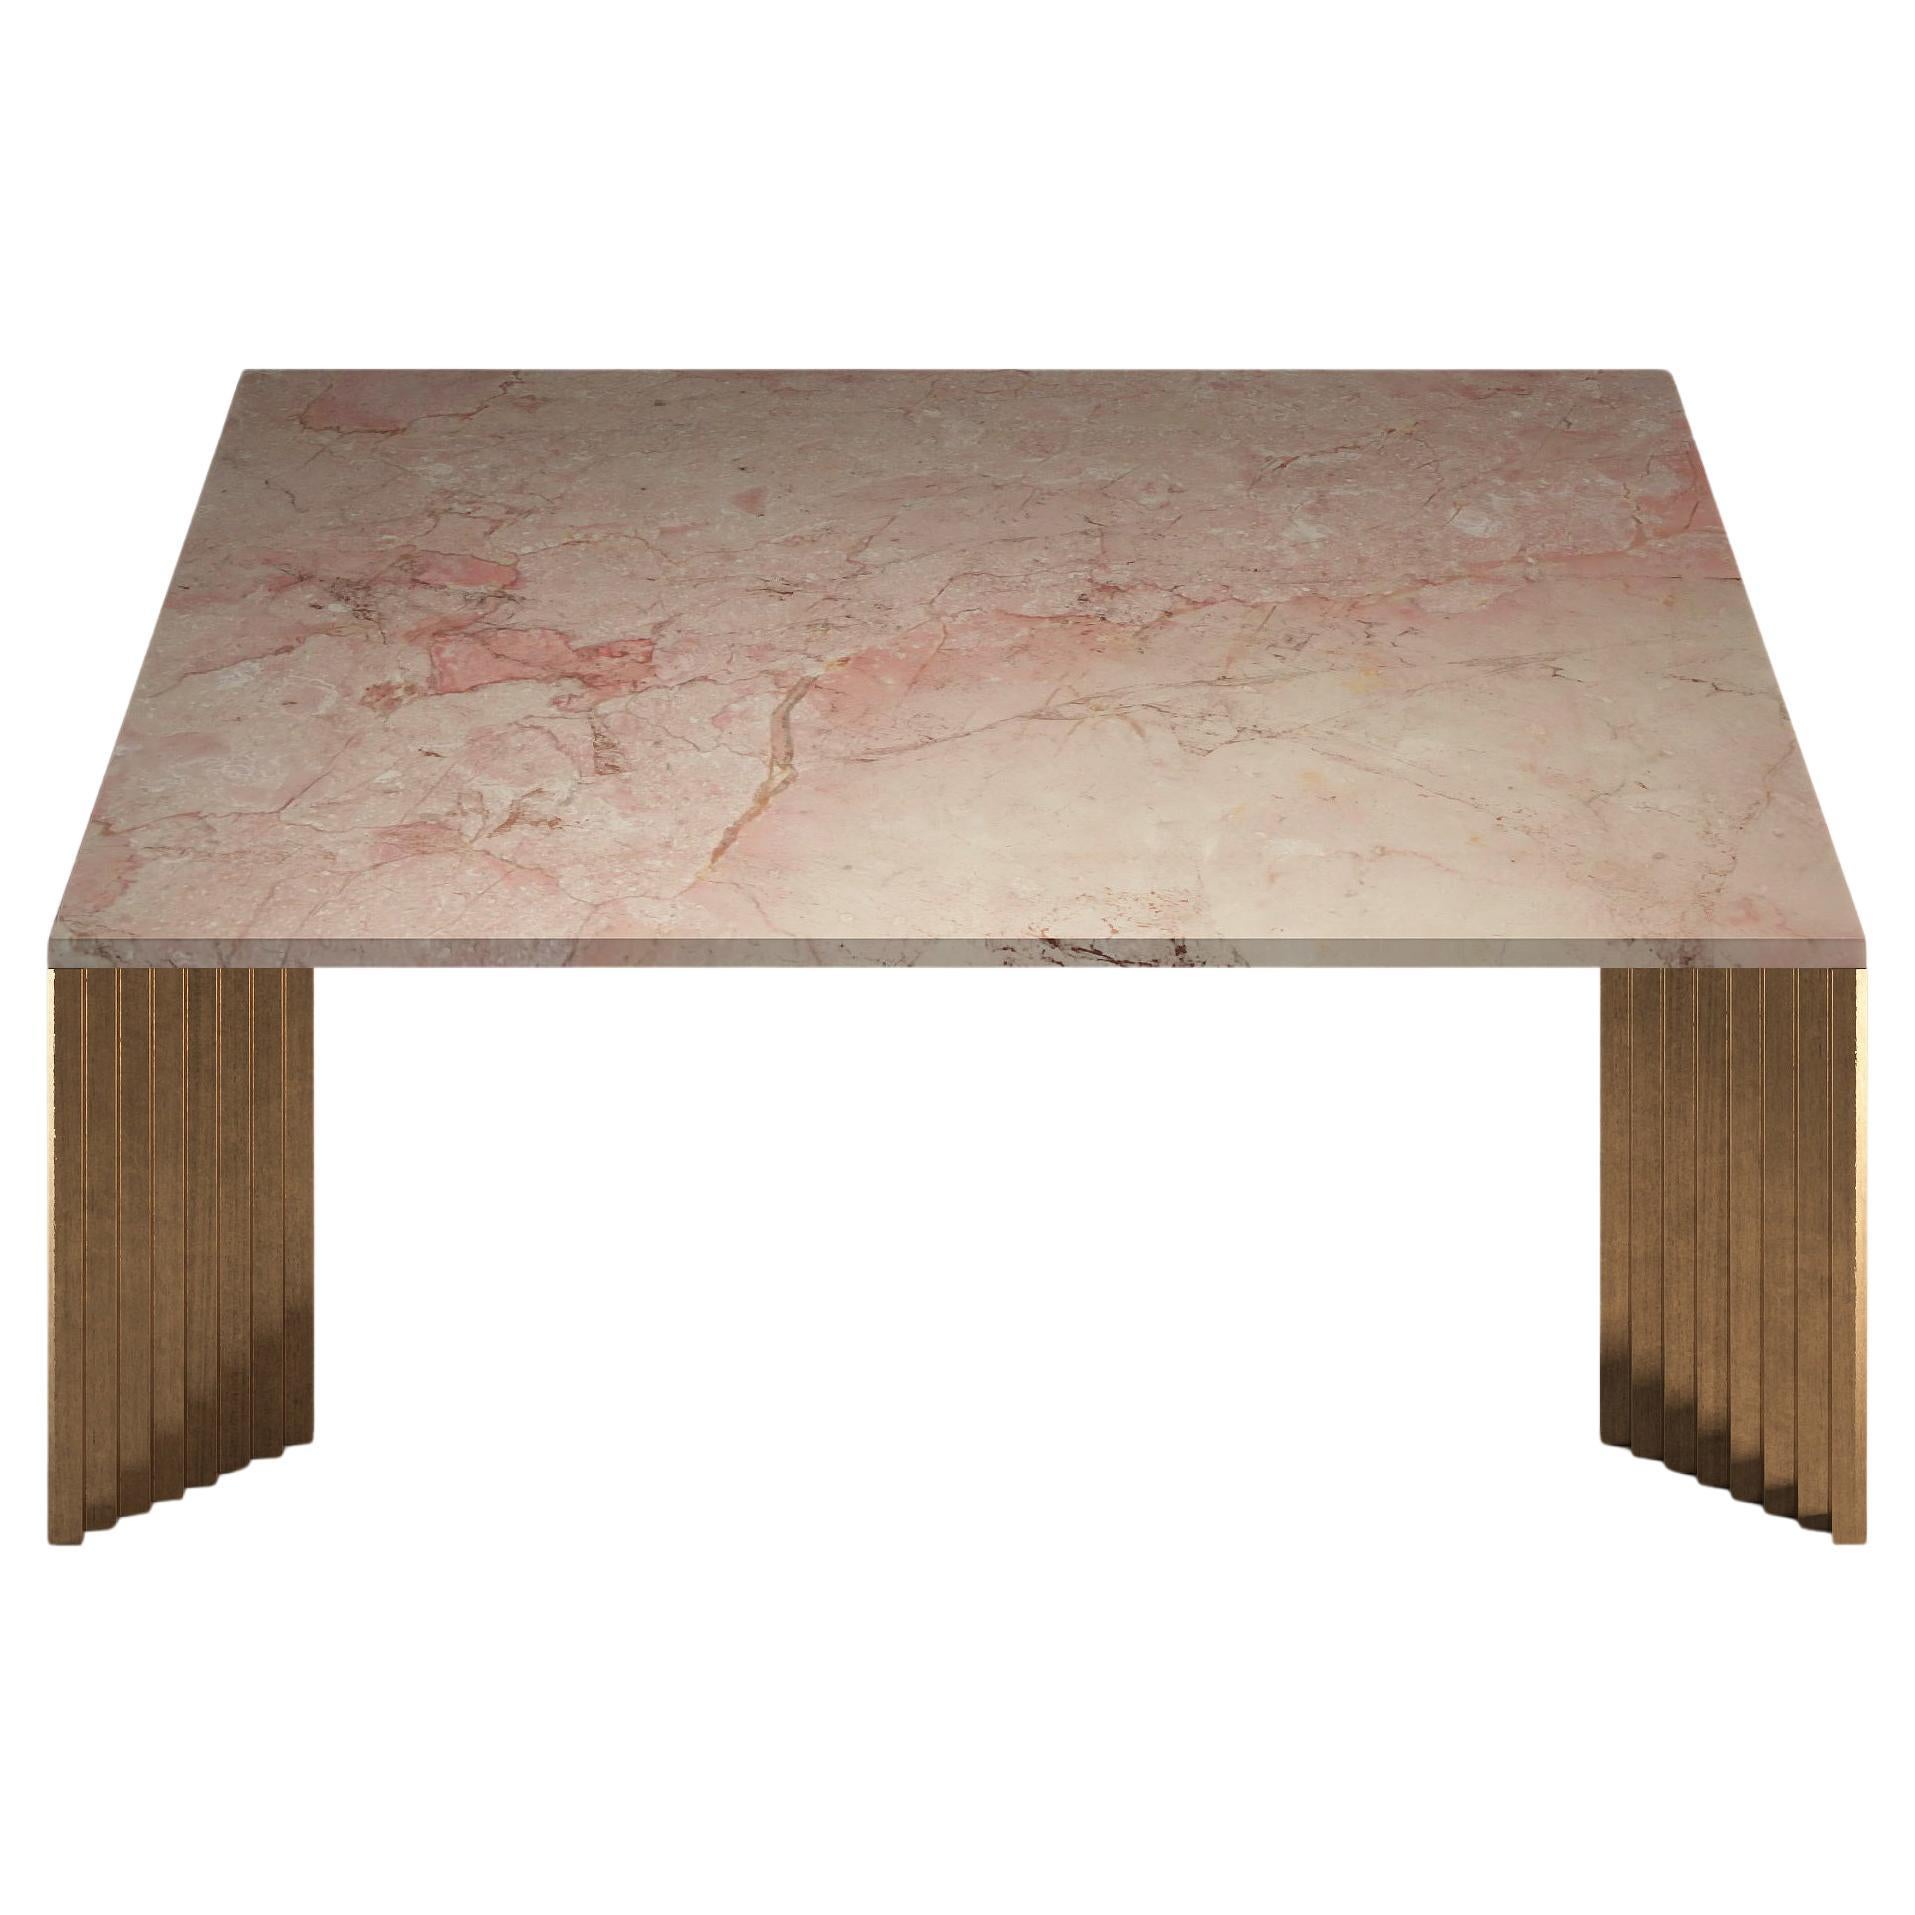 Piero Rosa Tea Coffee Table by Fred and Juul